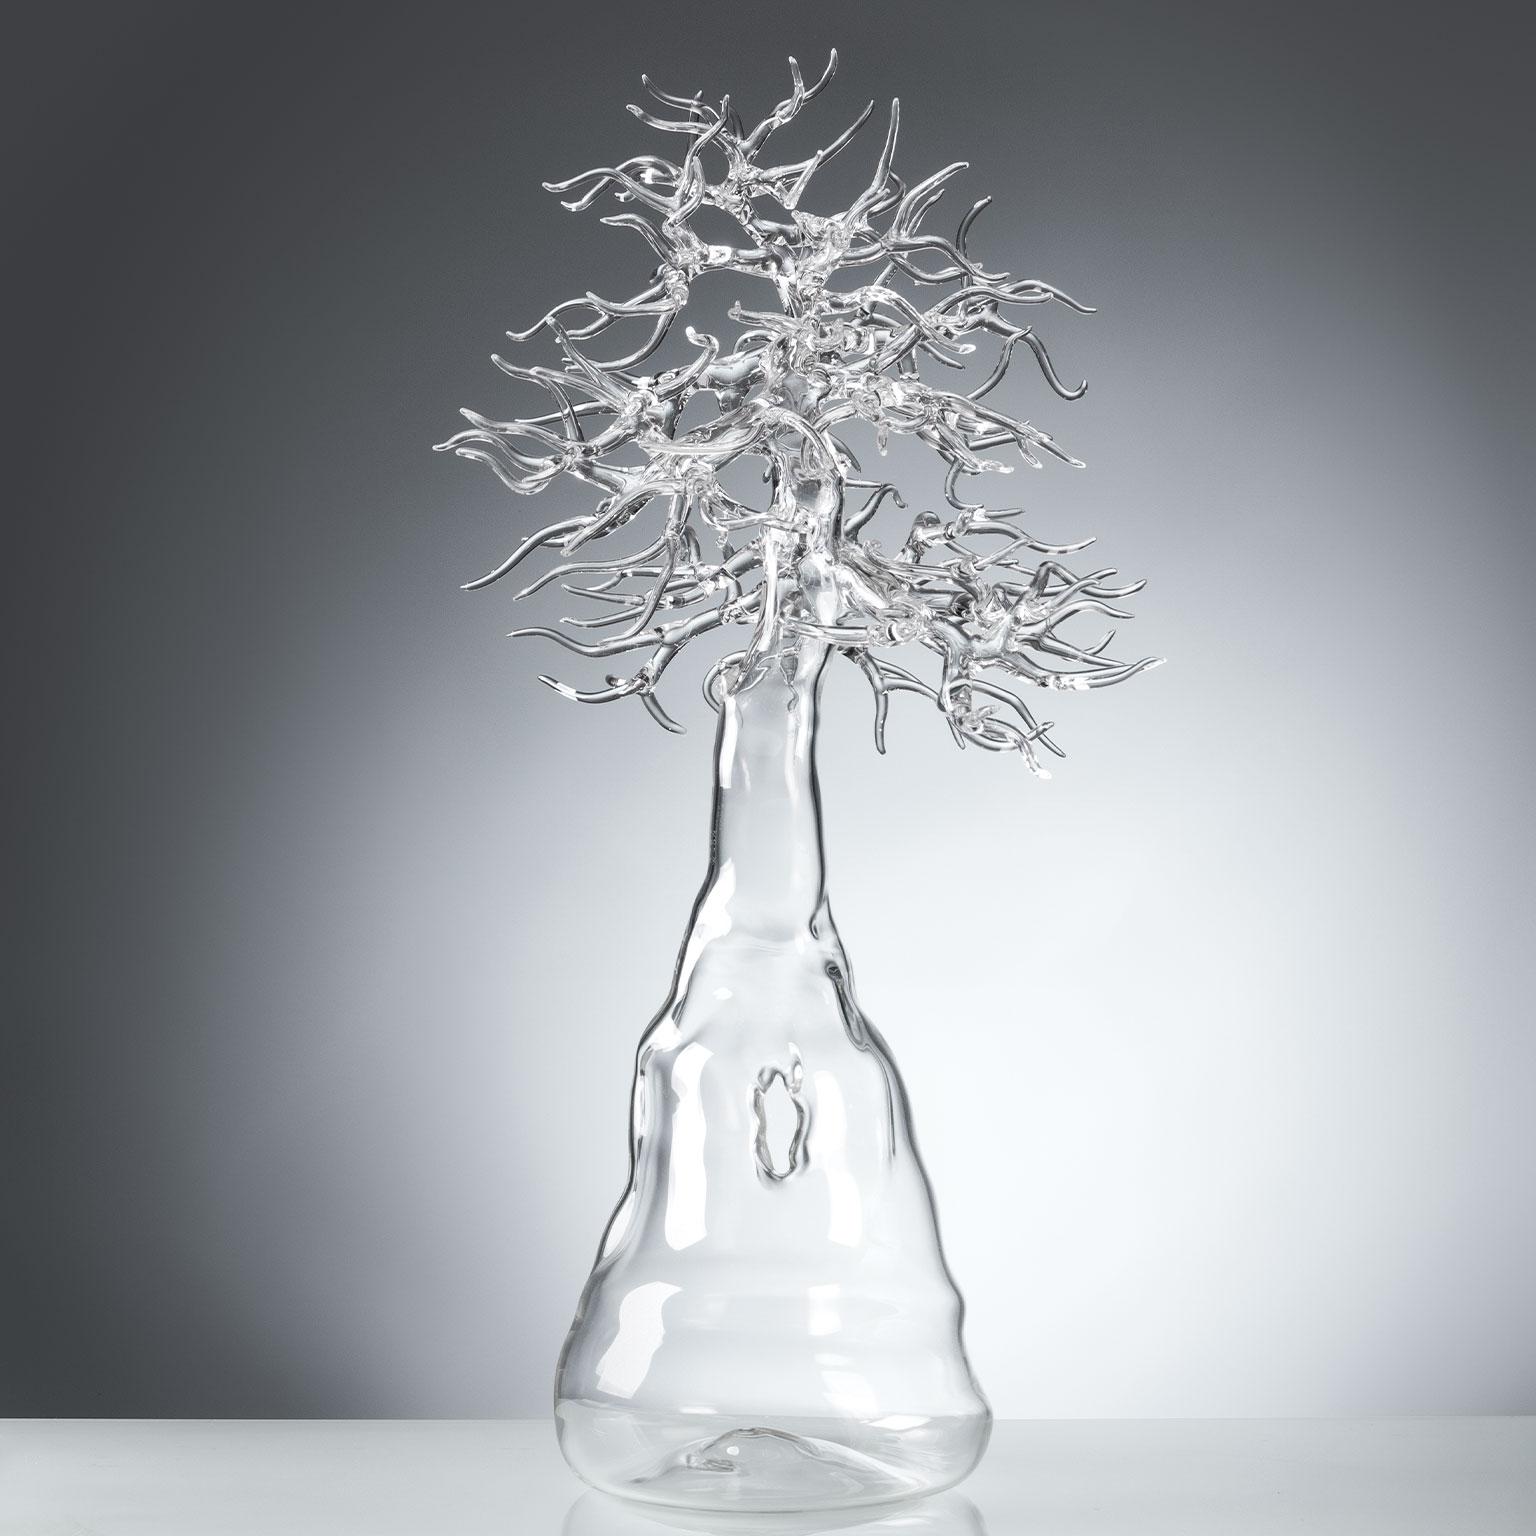 Hand blown glass sculpture representing a bonsai tree.

Artist: Simone Crestani
Material: Borosilicate glass
Technique: Flameworking
Unique piece
Year: 2017
Measures: Height 20.4”, width 9.8”, depth 10.6”.
Signed and dated on the trunk.